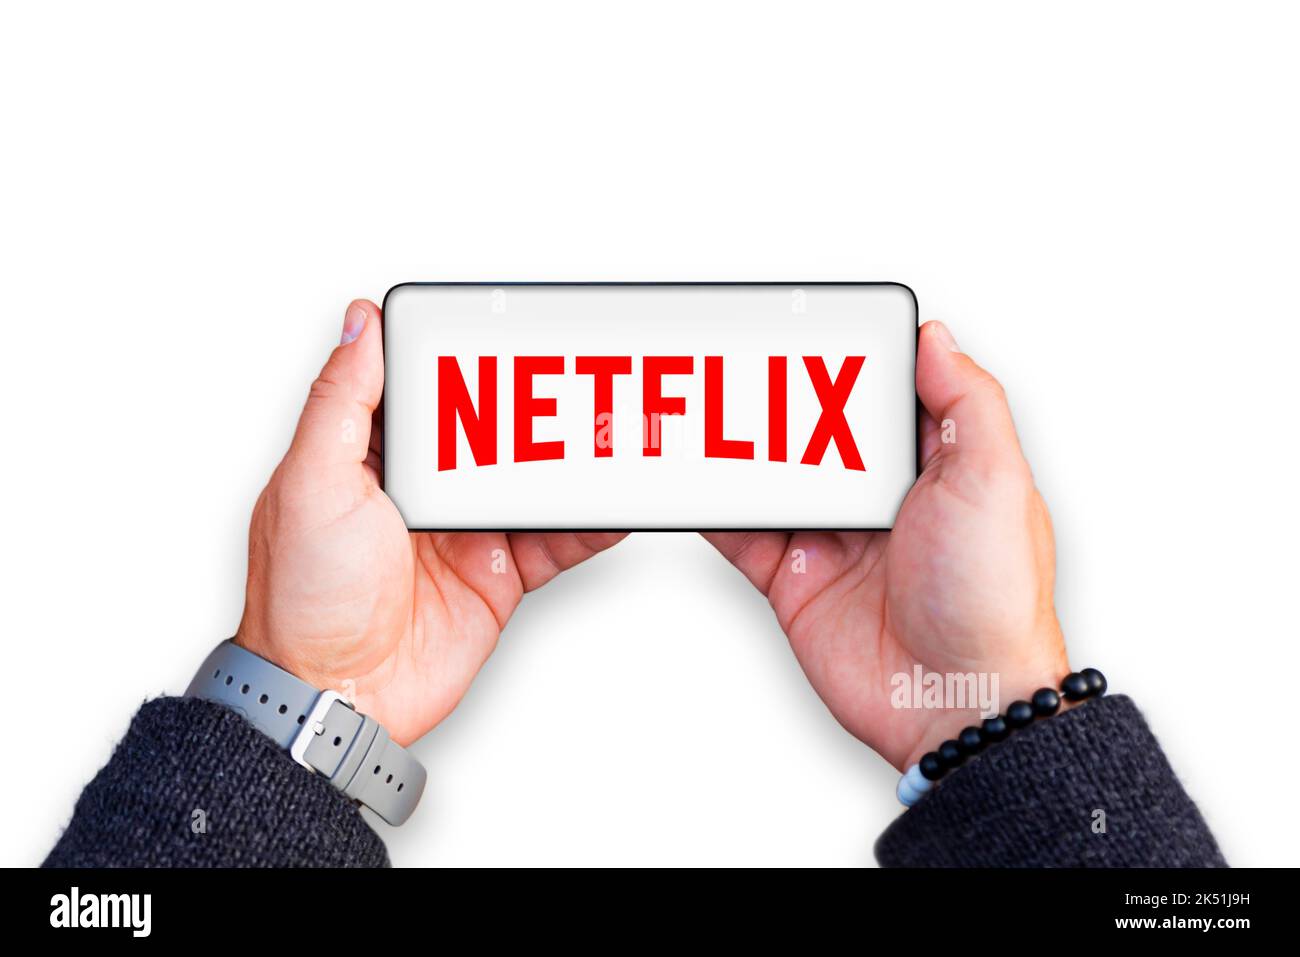 Belgrade, Serbia - October 05, 2022: Holding smartphone in hands with Netflix logo on screen. Netflix is TV show and movie streaming service Stock Photo